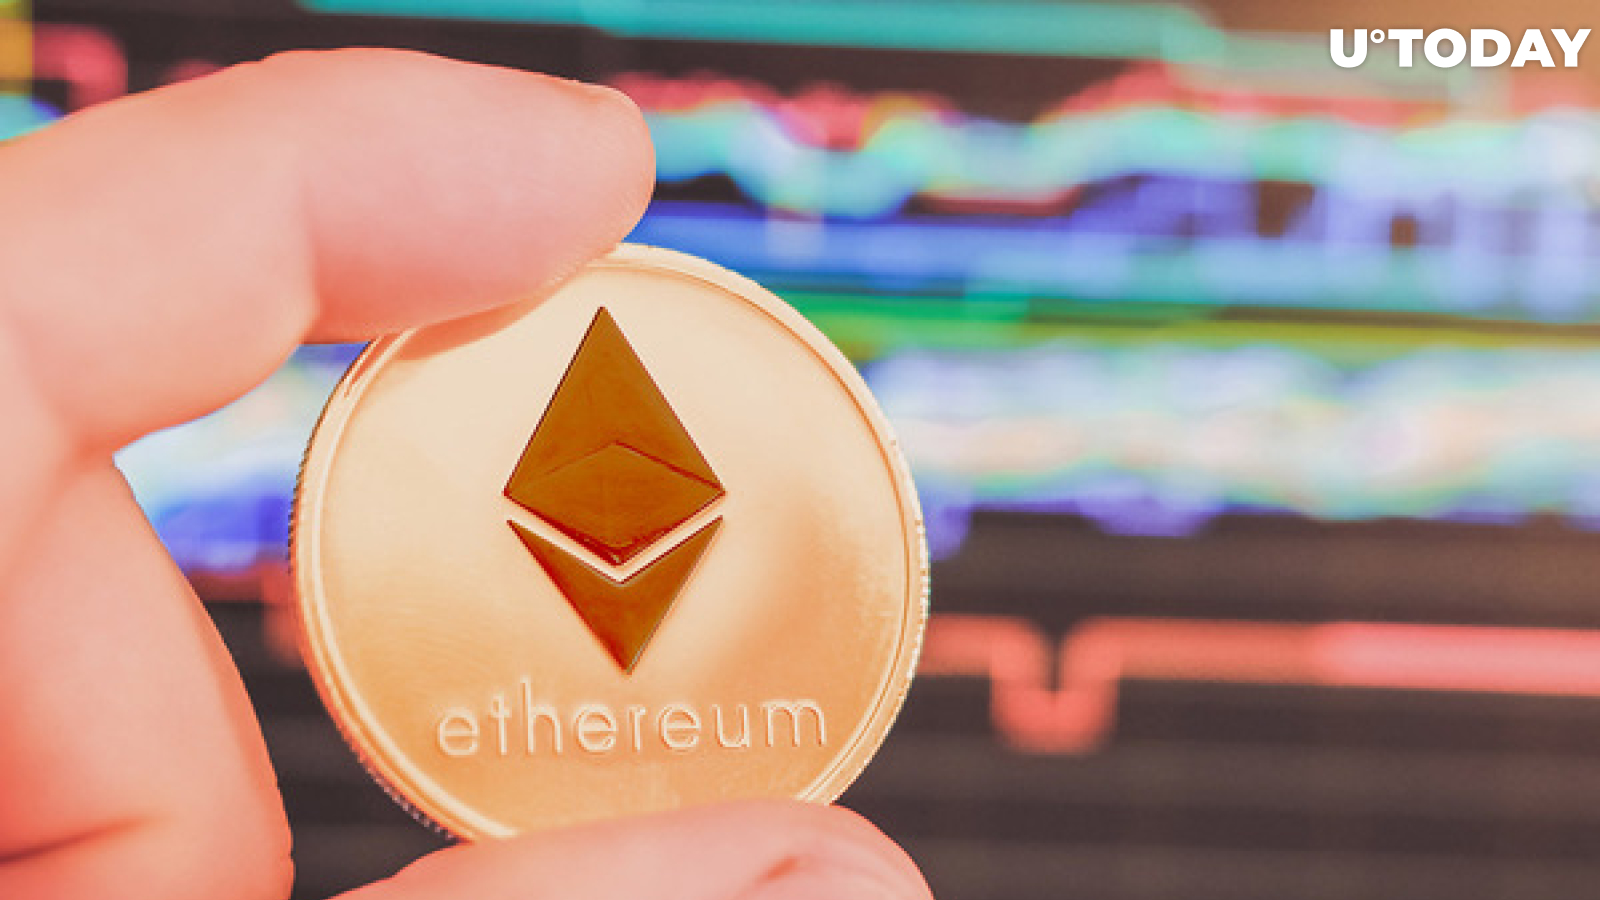 Centralized Exchanges Hold More Ethereum Than Bitcoin: CryptoQuant Data